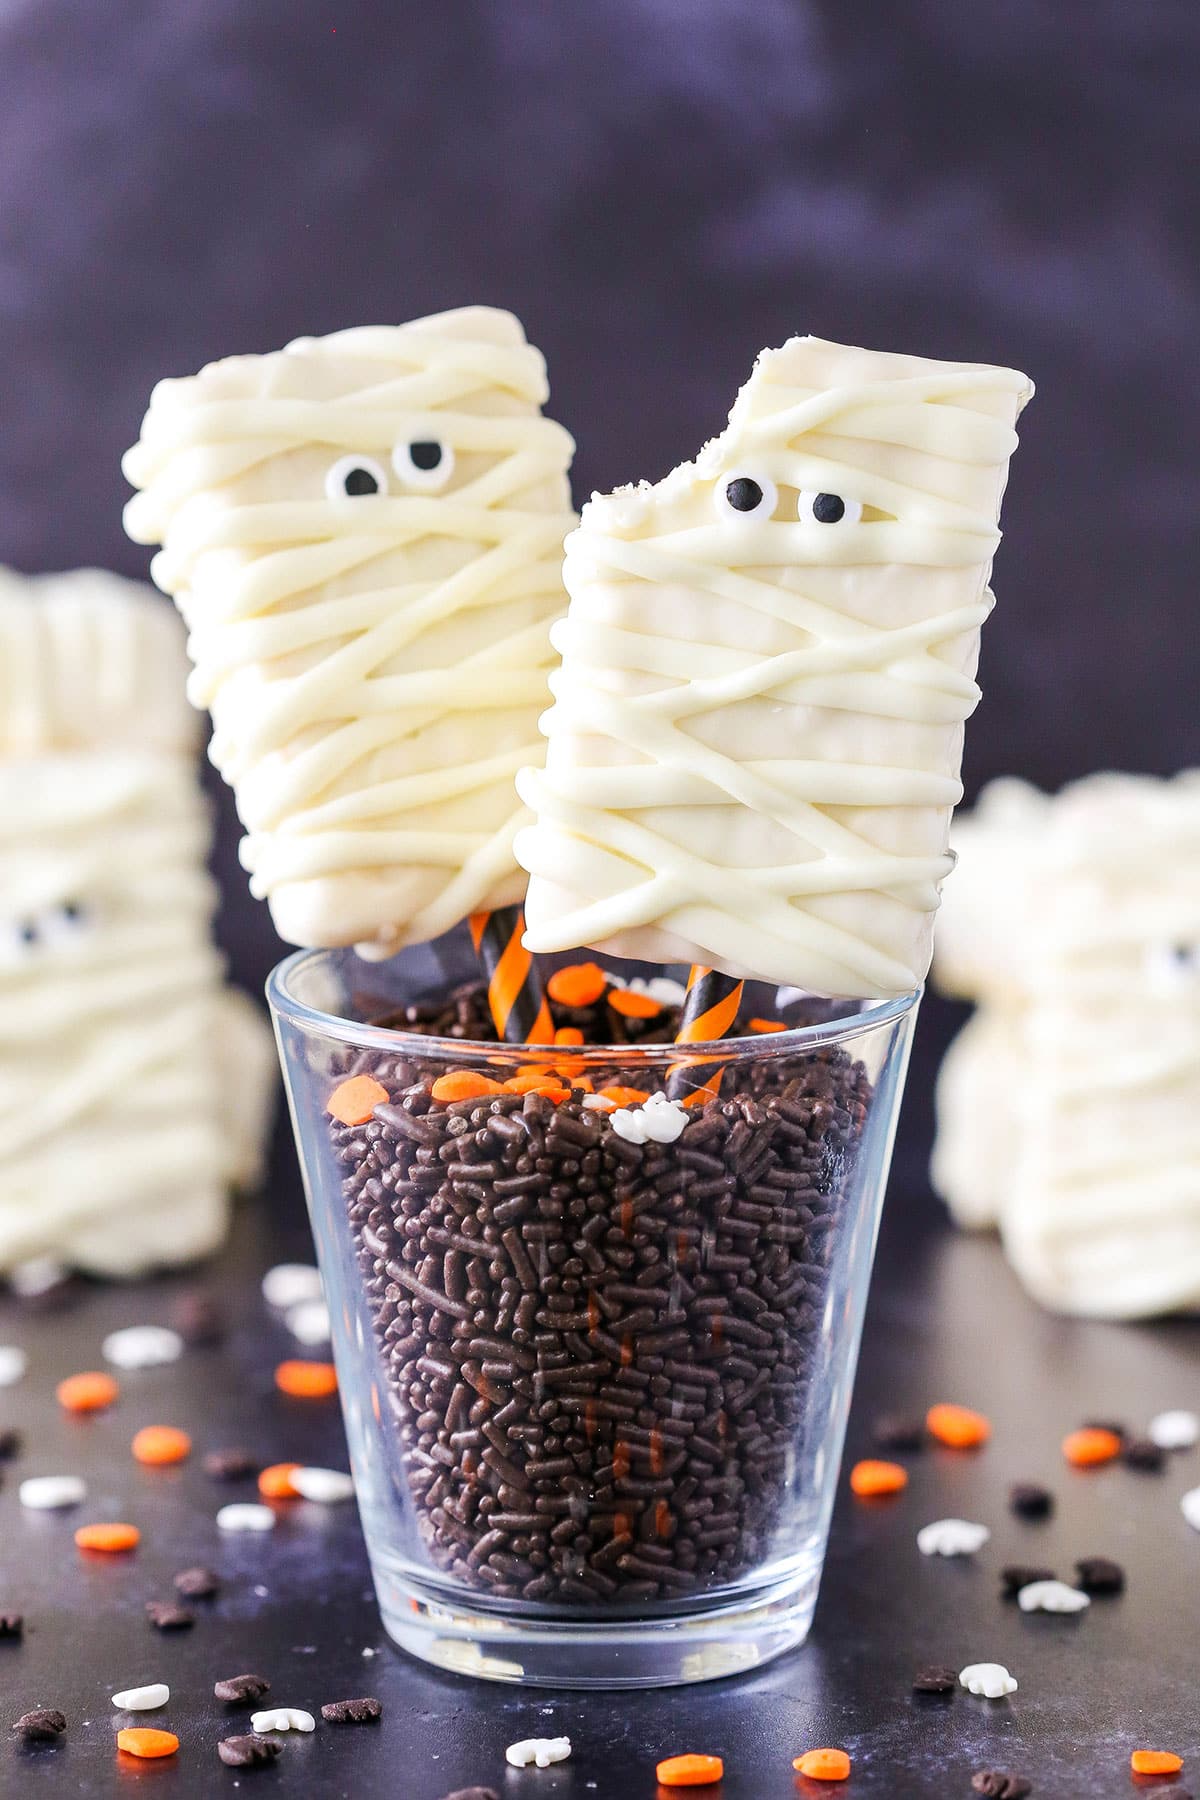 Two Mummy Rice Krispies Treats, one with a bite removed, on orange and black straws in a glass filled with chocolate sprinkles